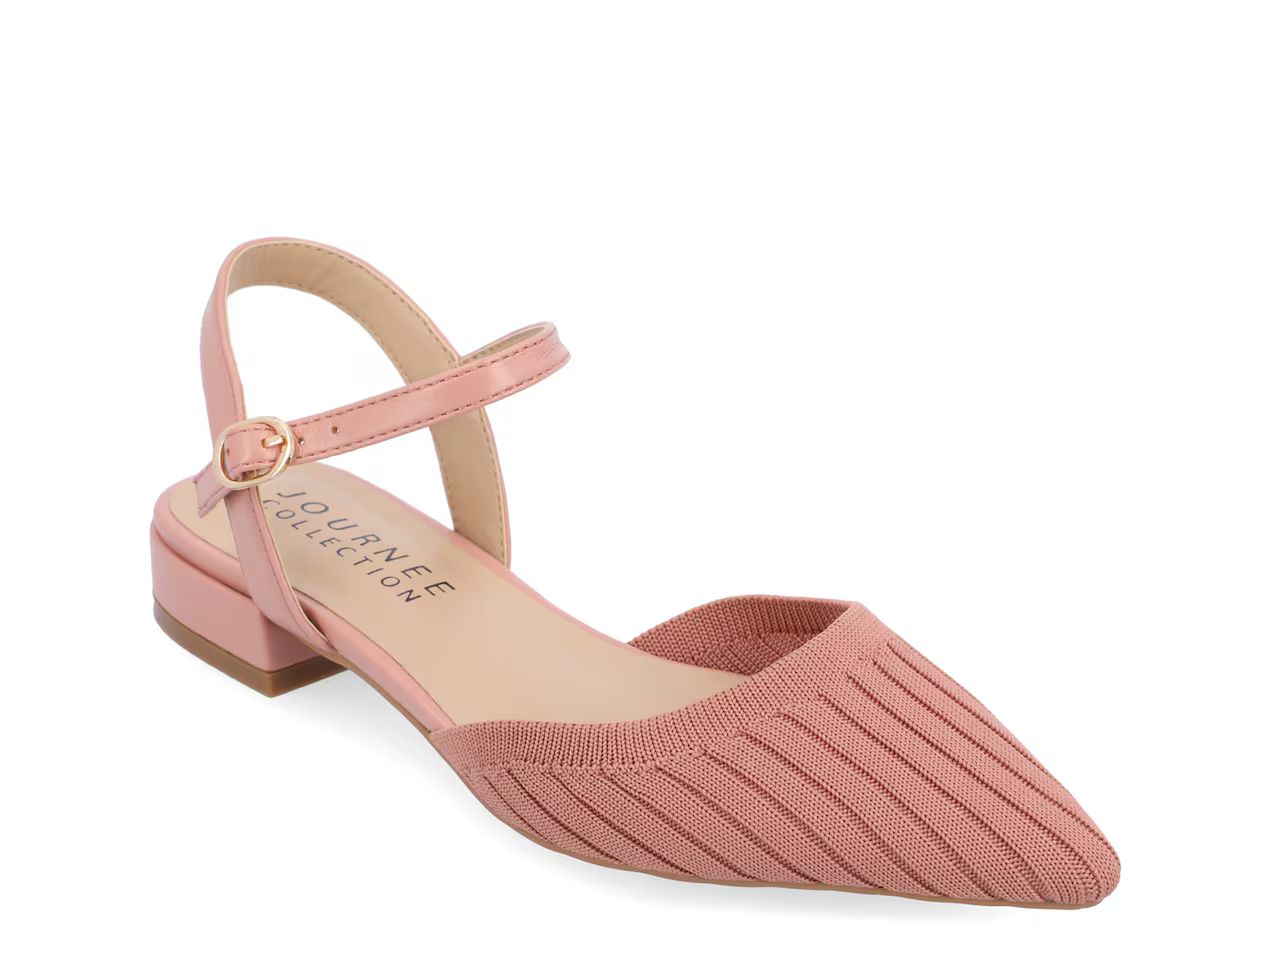 Journee Collection Ansley Flat | DSW